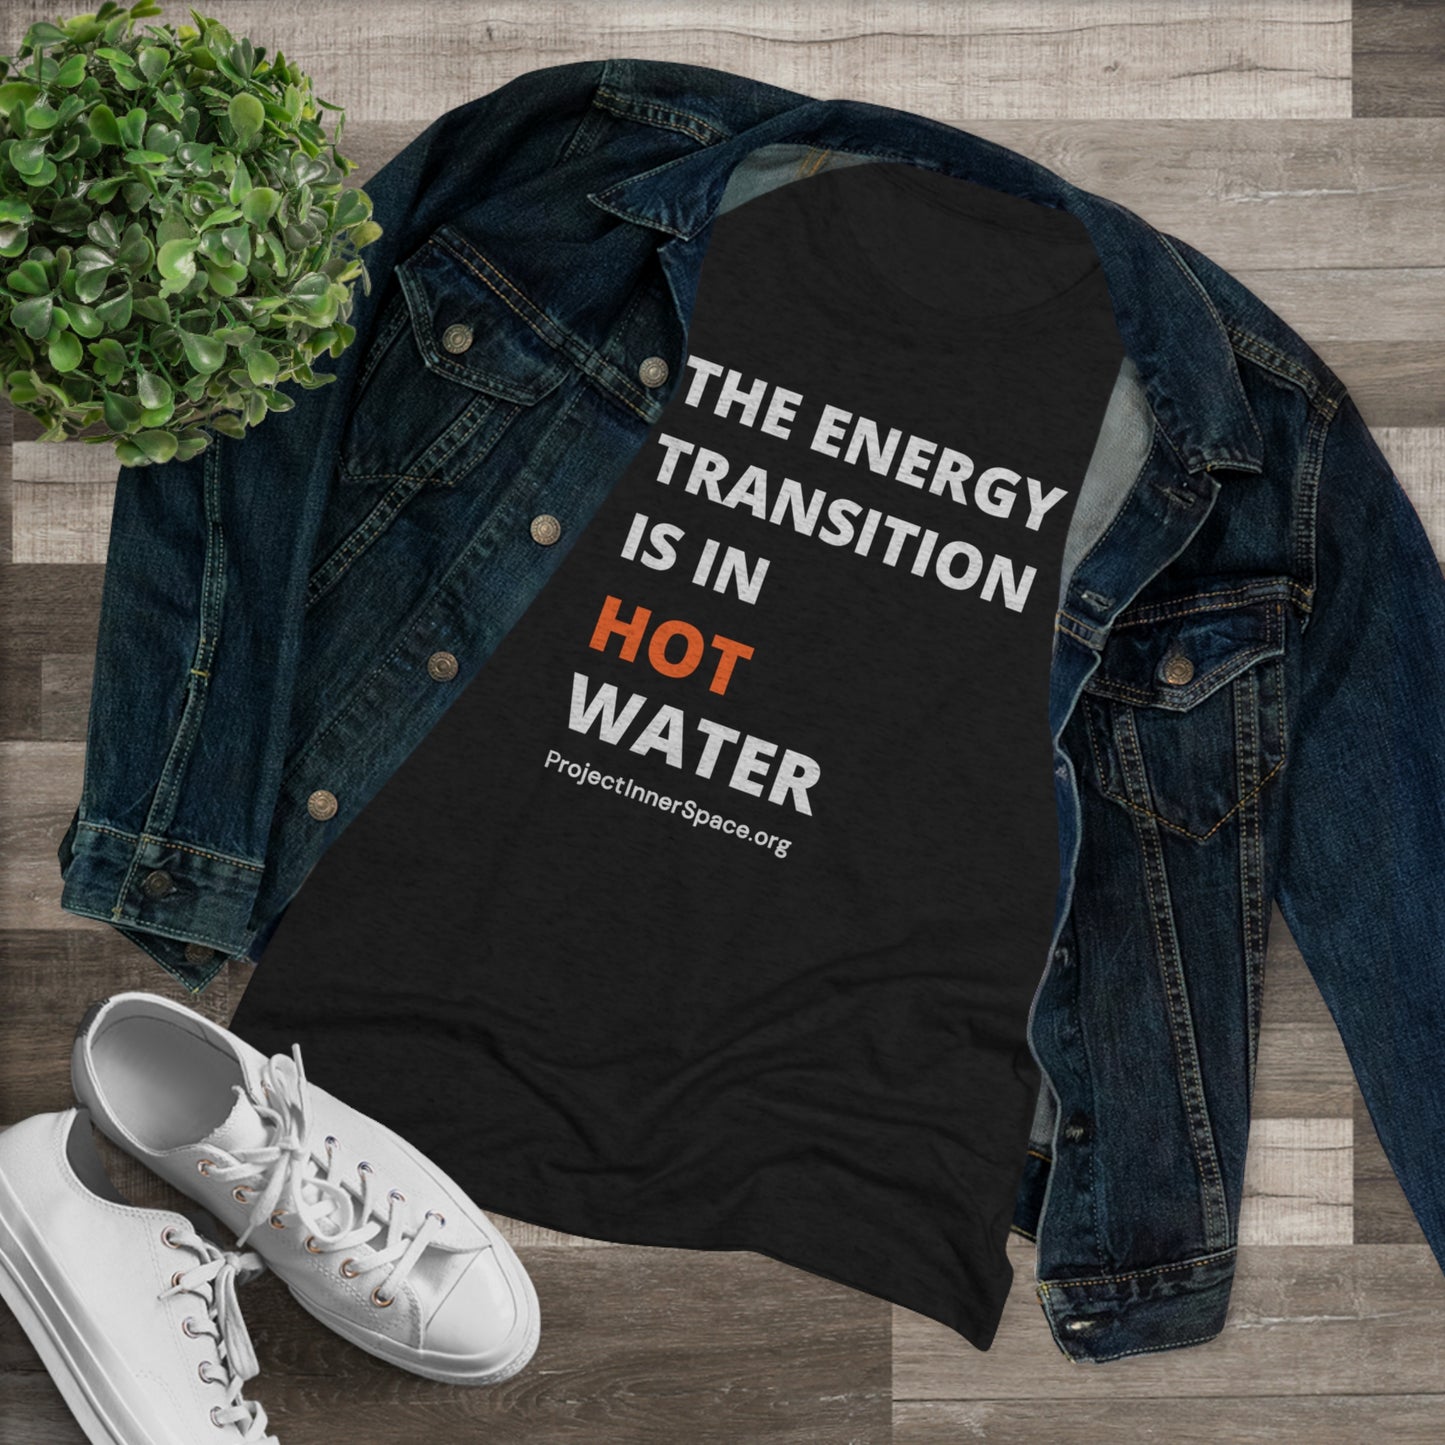 The Energy Transition Is In Hot Water - Women's T-Shirt